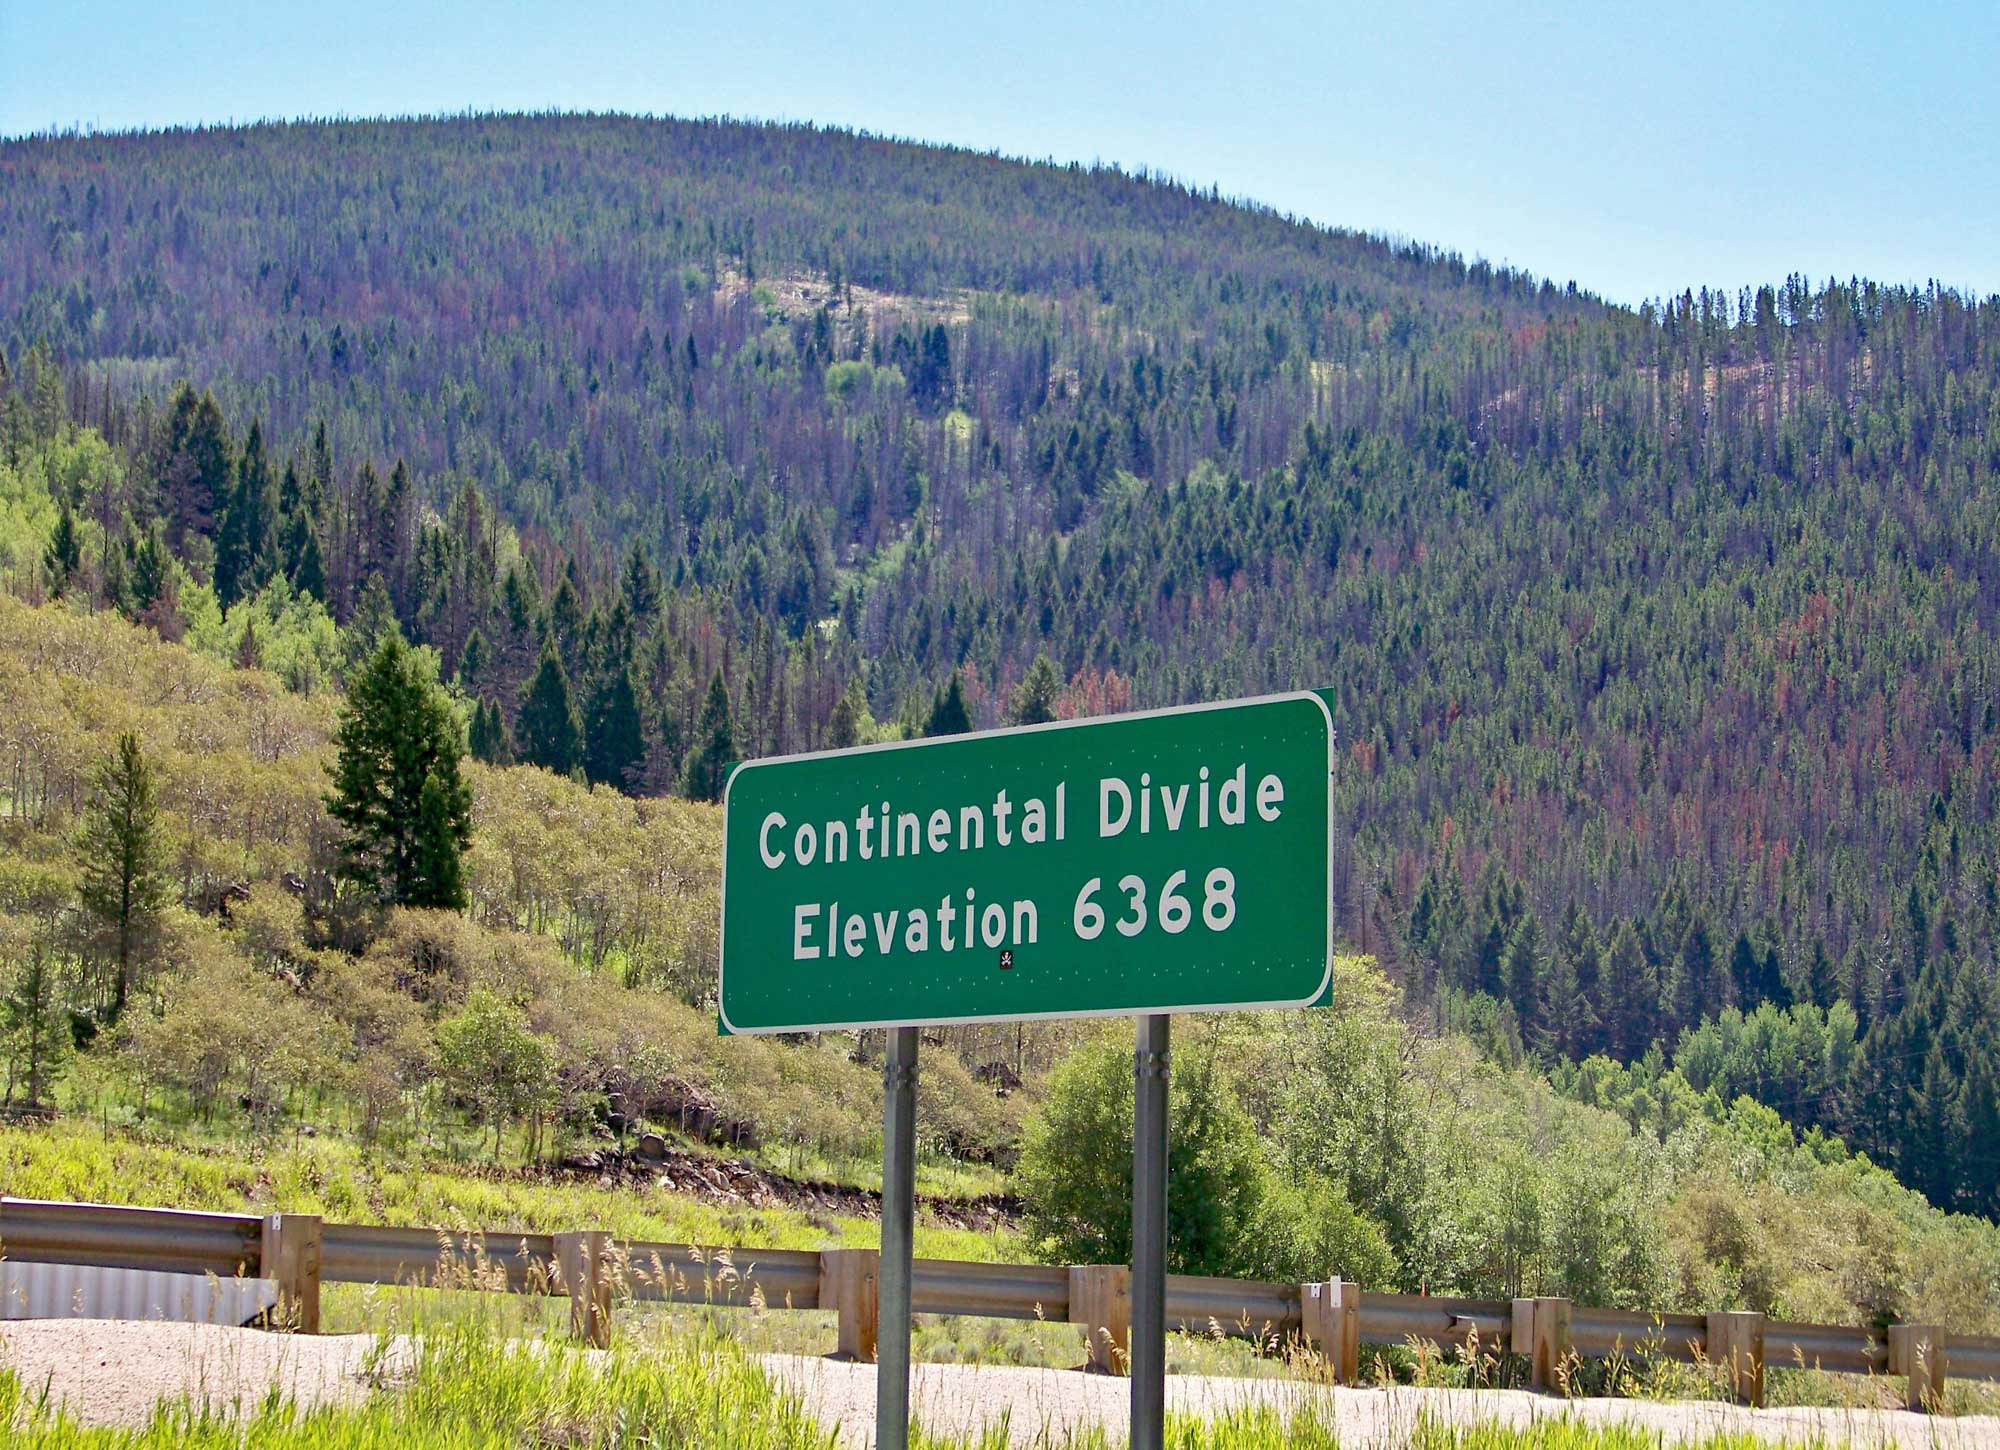 Photograph of the continental divide at Elk Park Pass, Montana, in 2010. The photo shows a green and white road sign that says "Continental Divide, Elevation 6368" in the foreground in front of a highway guardrail. Hills covered with conifers and broadleaved trees rise in the background.